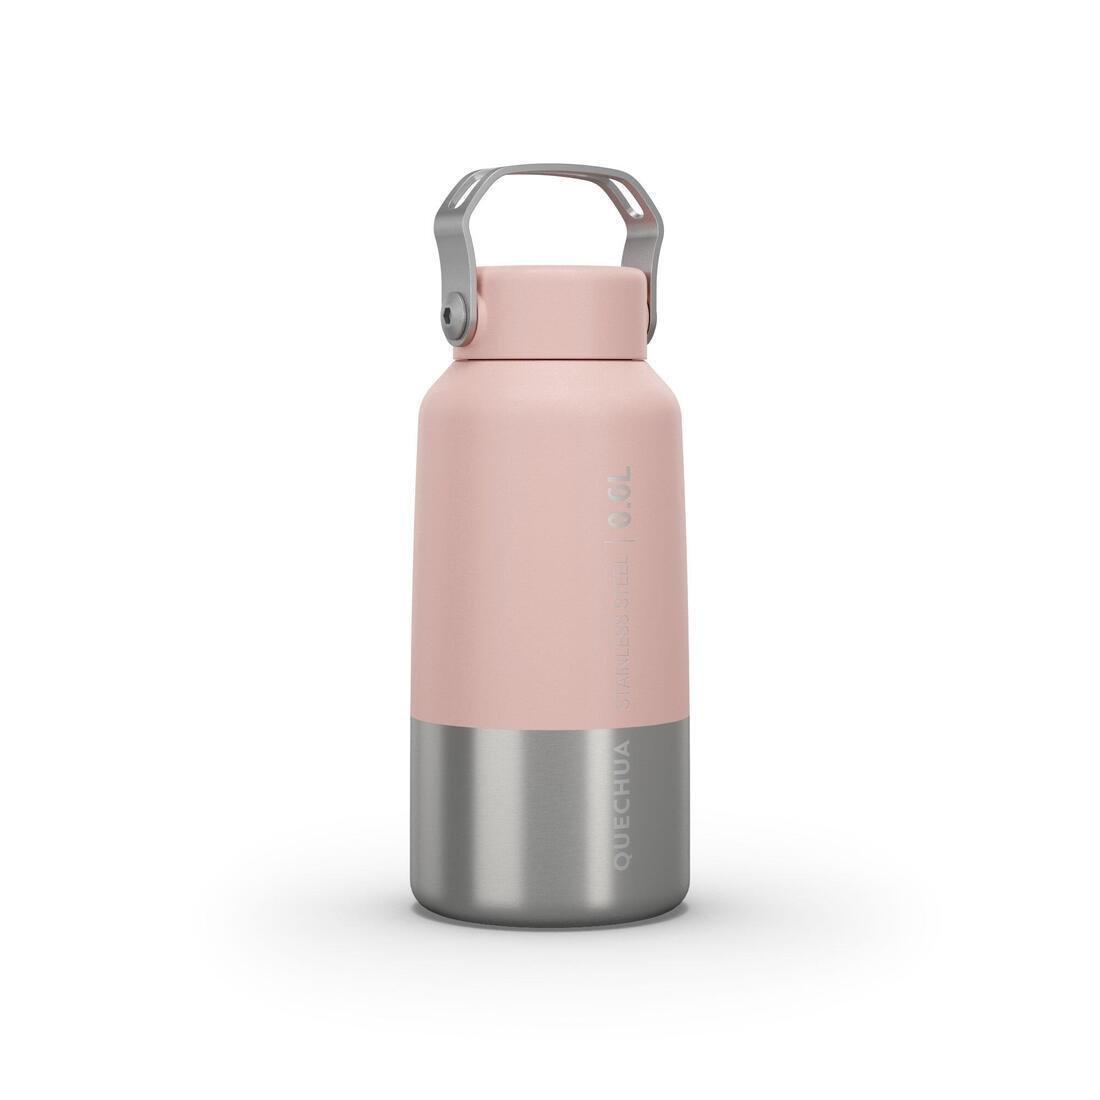 QUECHUA - Stainless Steel Hiking Flask With Screw Cap Mh100 0.6 L, Pink